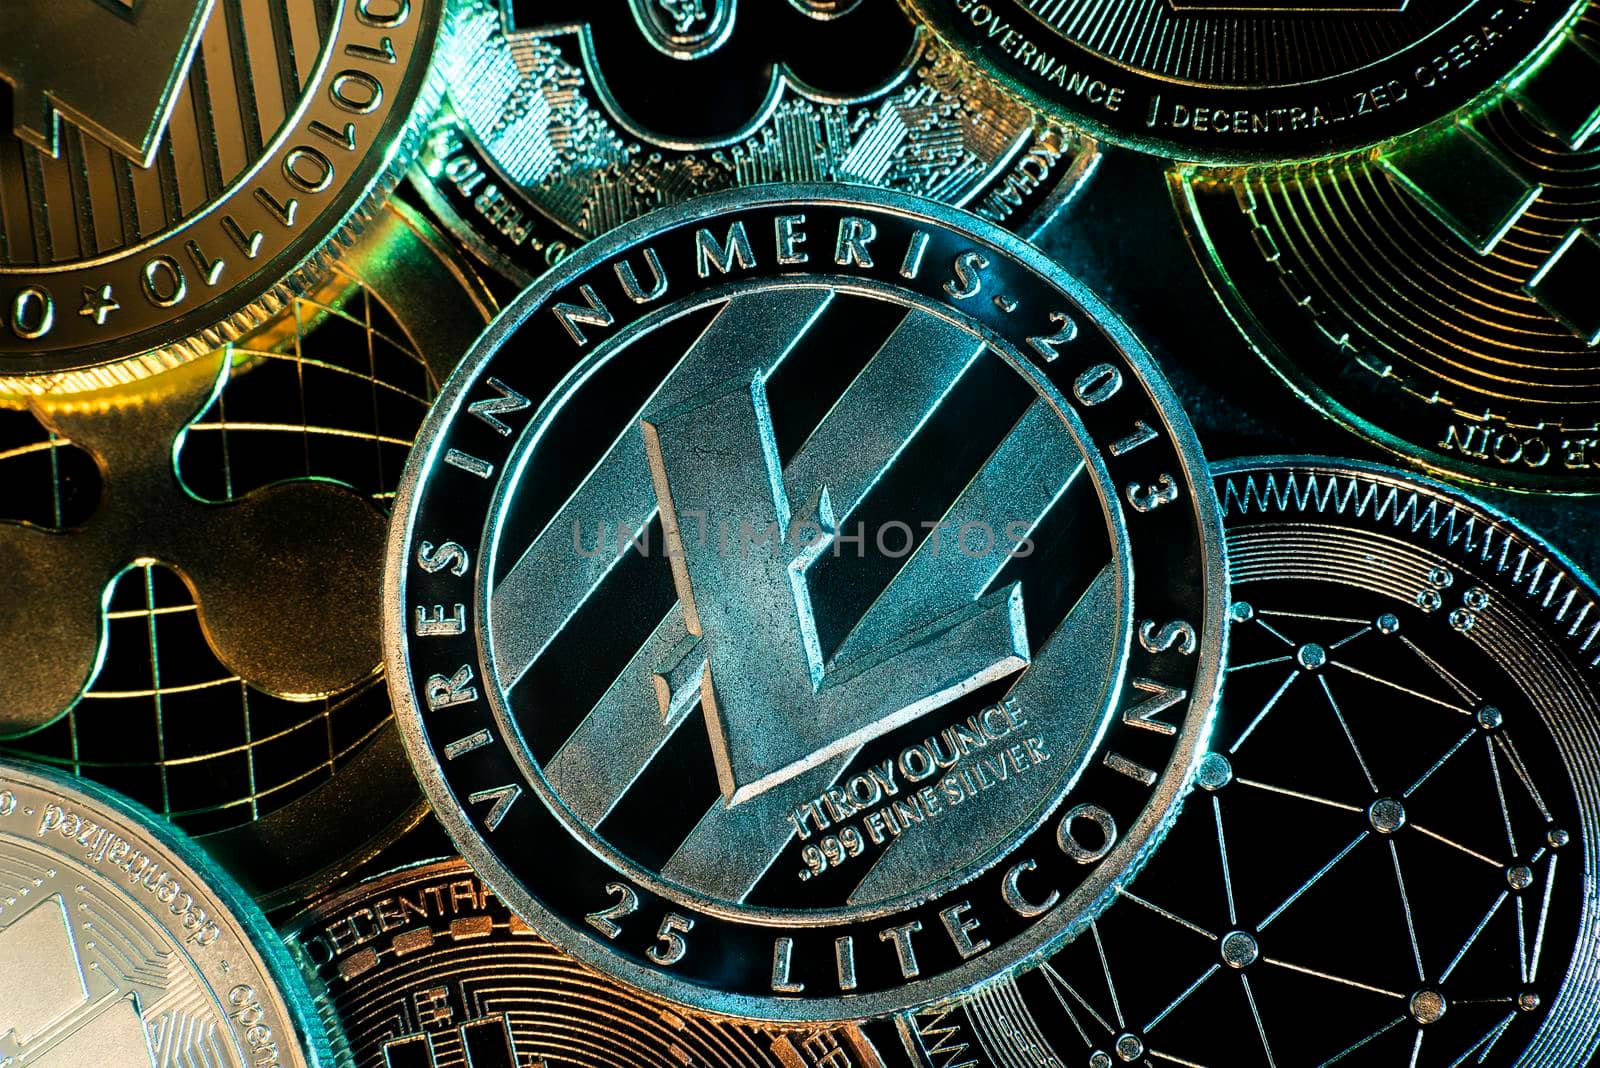 Horizontal view of cryptocurrency tokens, including Litecoin, Bitcoin, dogecoin, and ethererum saw from above on a black background. flat lay High quality photo